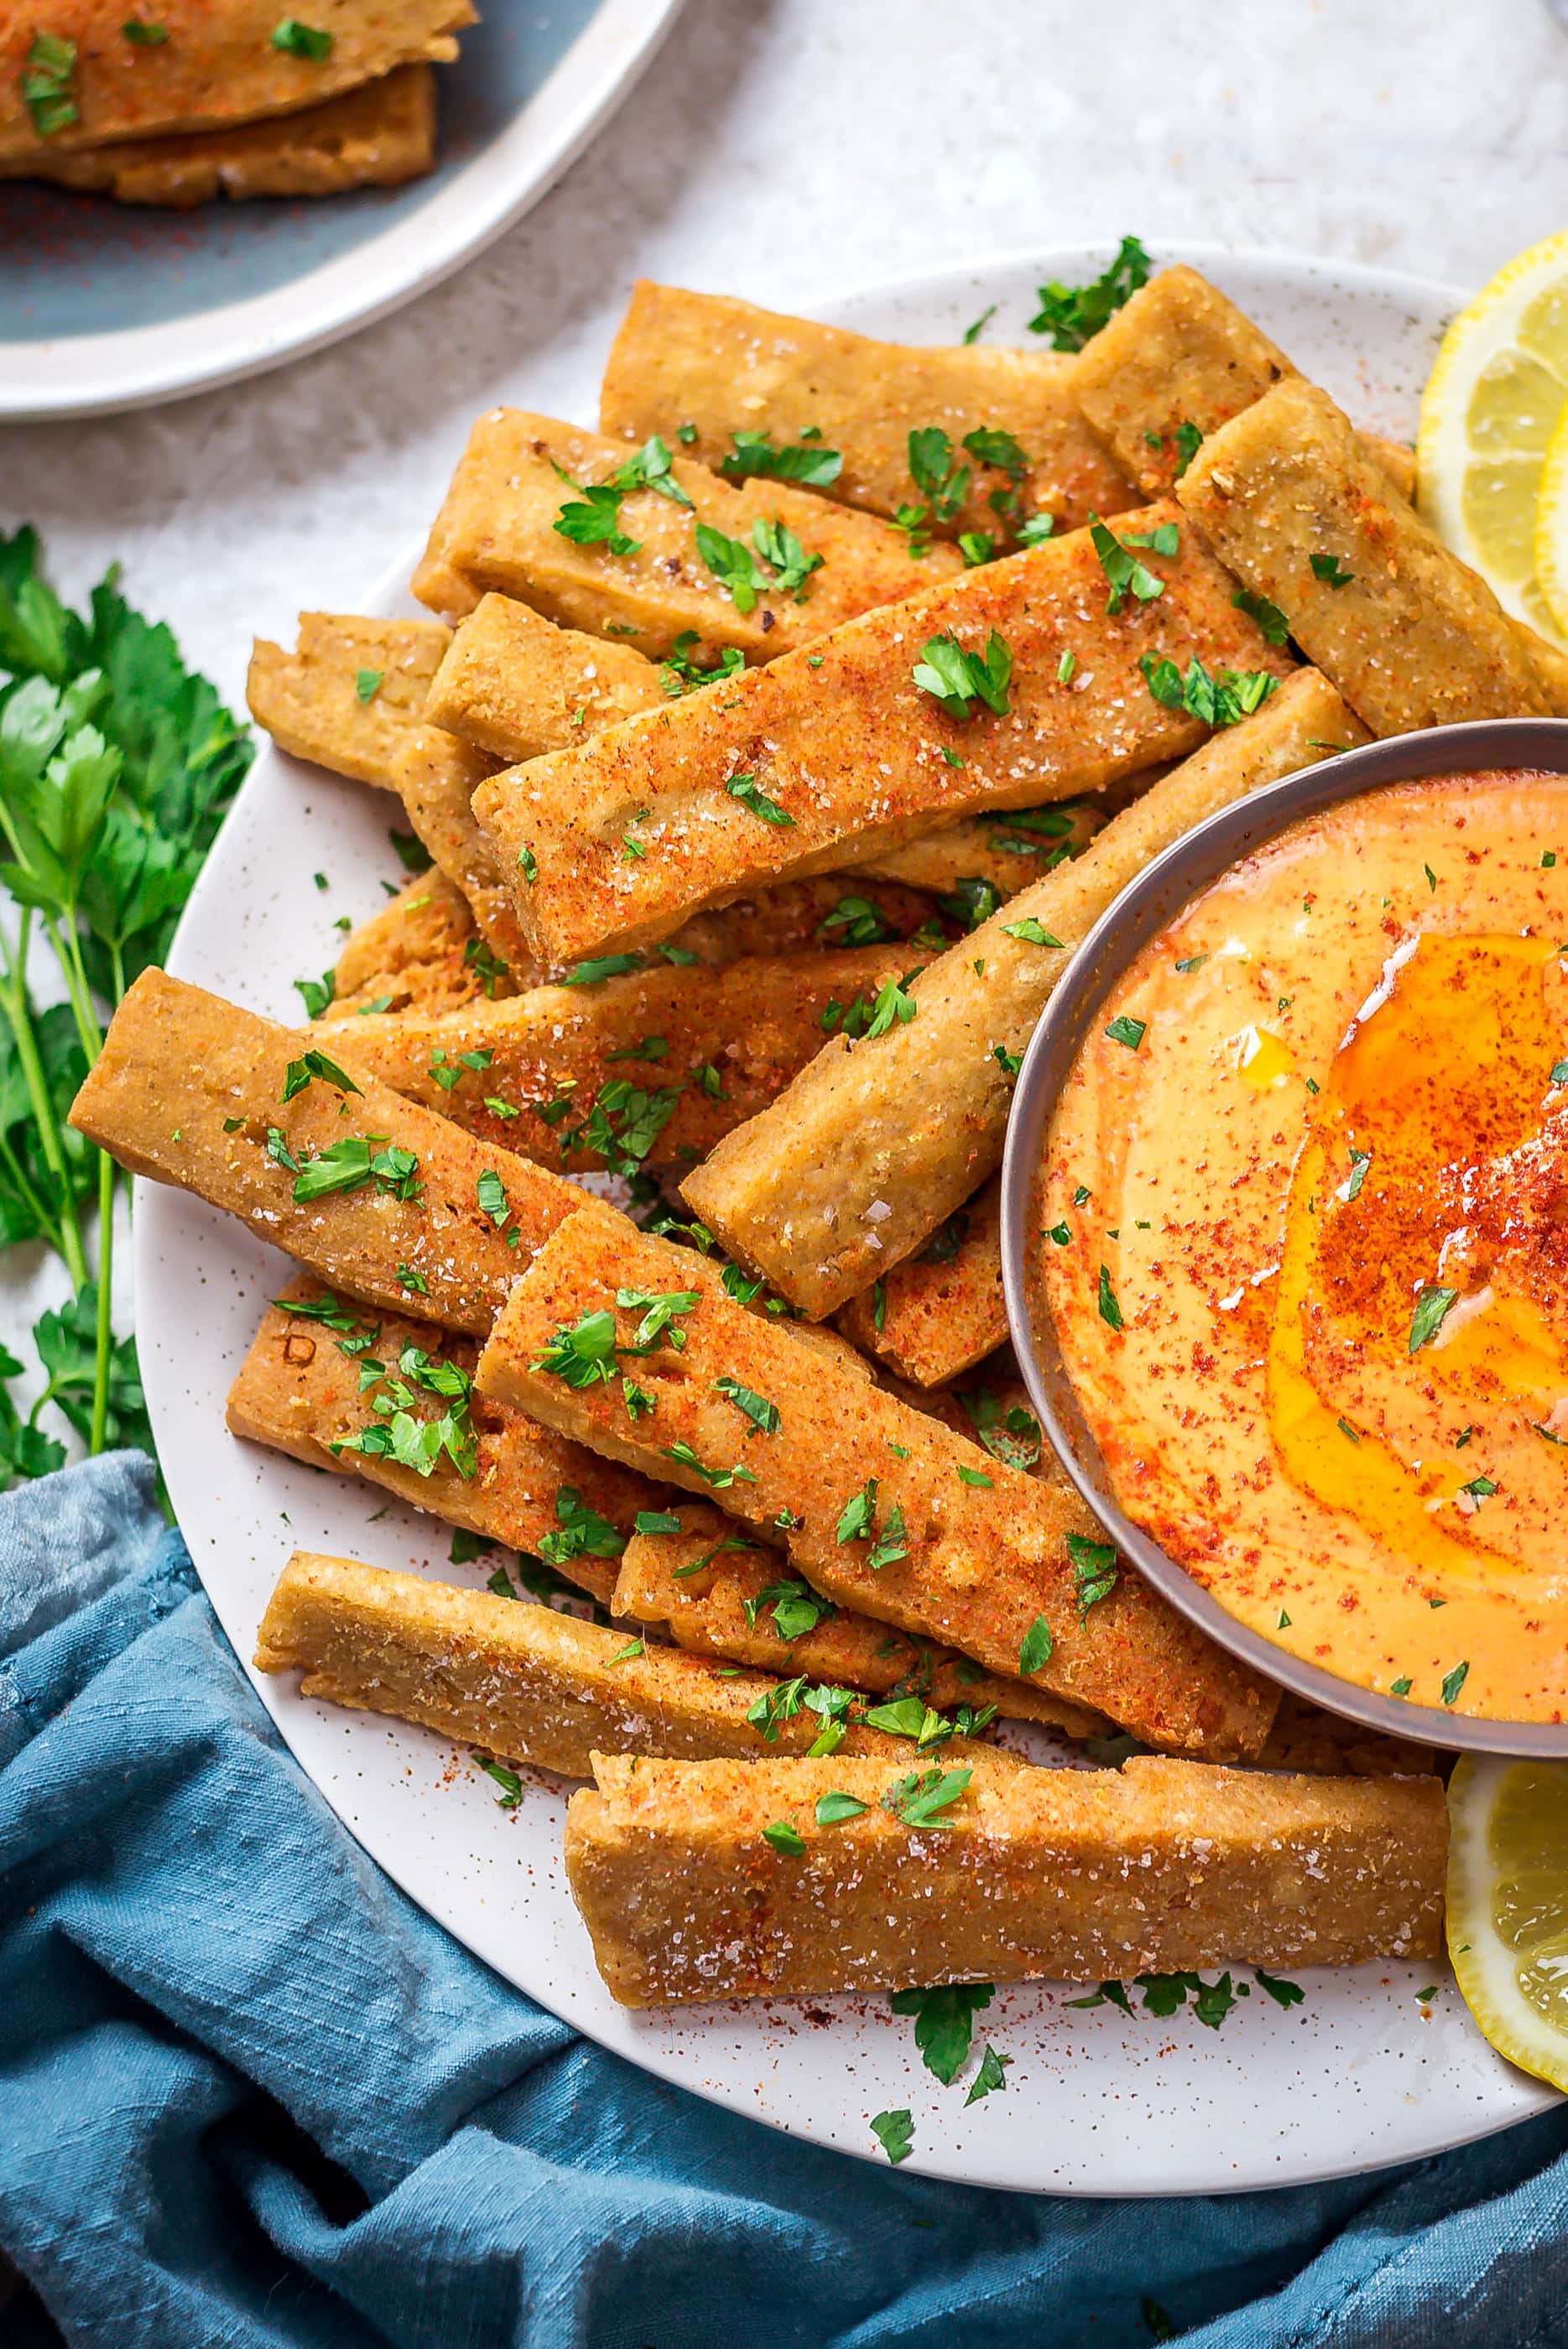 A close up of Hummus Fries with Spicy Tahini Dip on a round white plate with a blue cloth below.